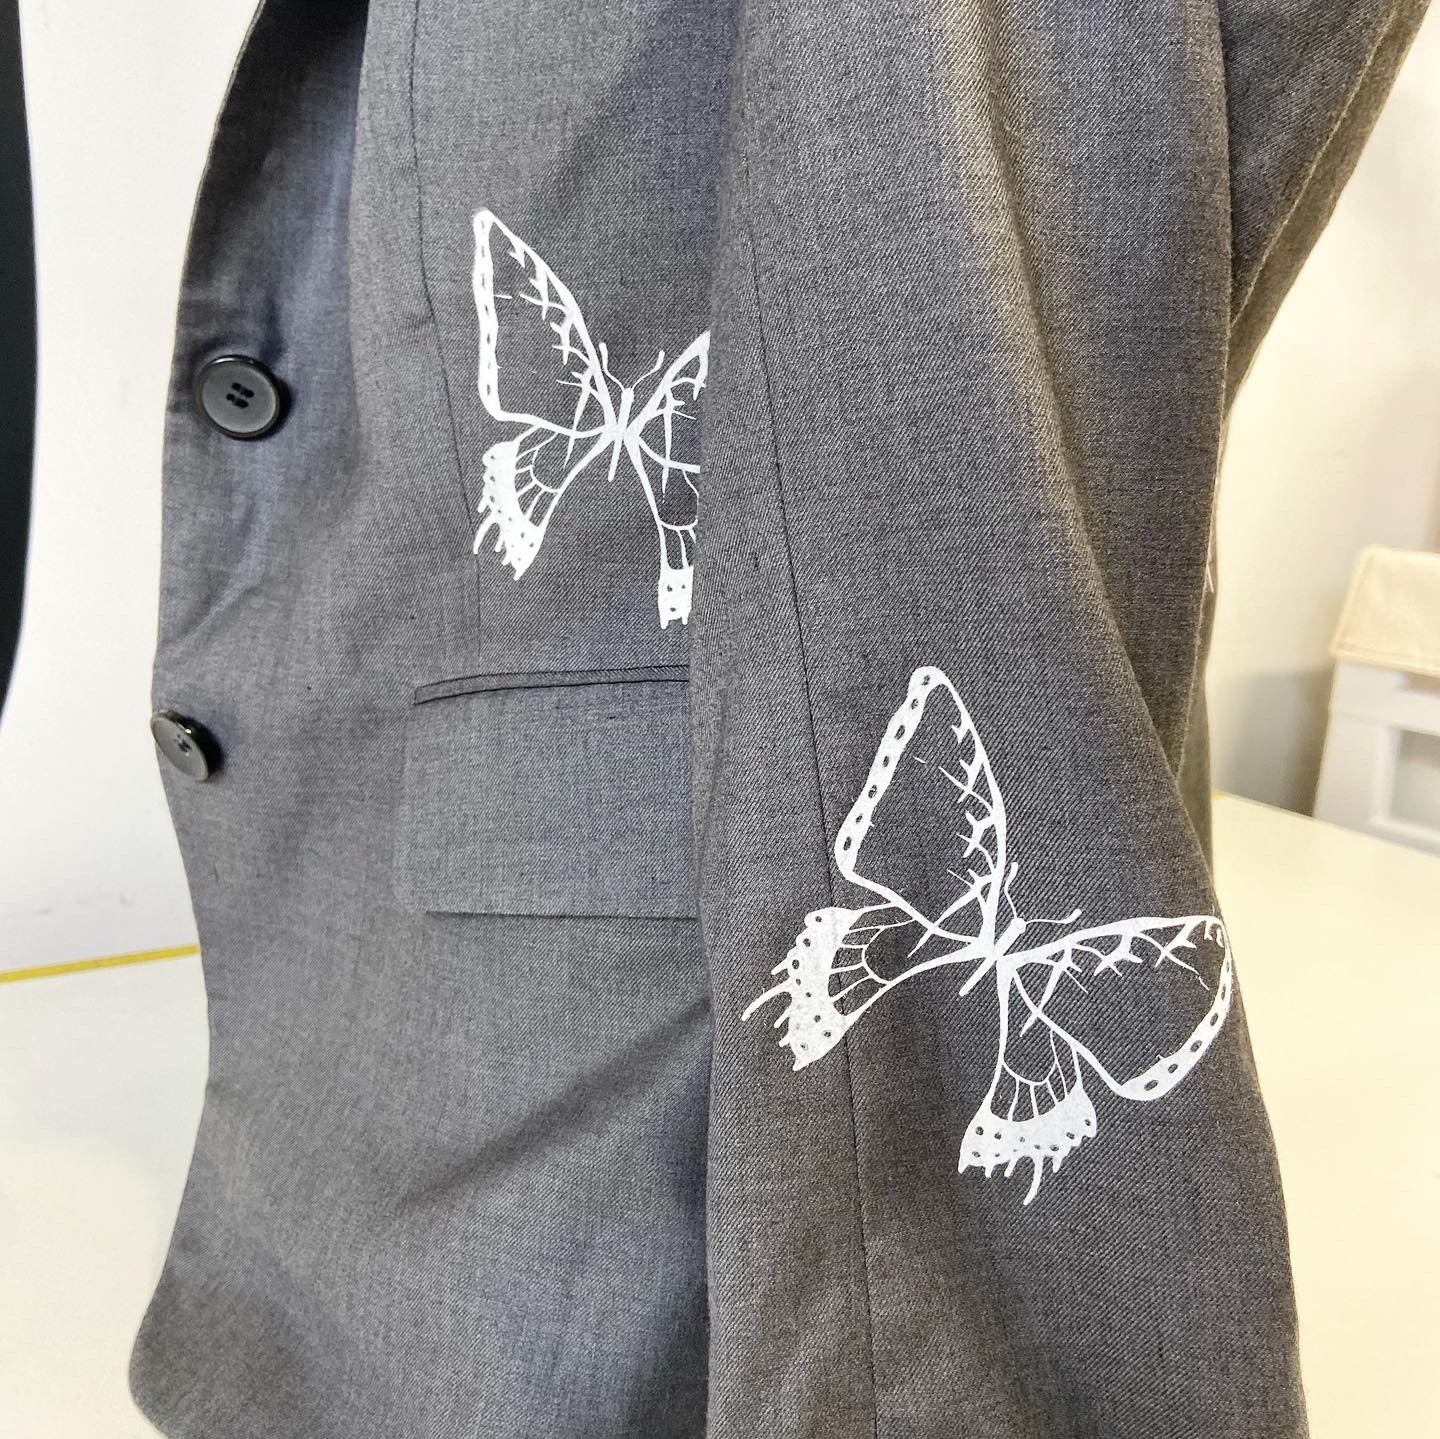 One of a Kind Hand Printed Butterflies on Women's Blazer